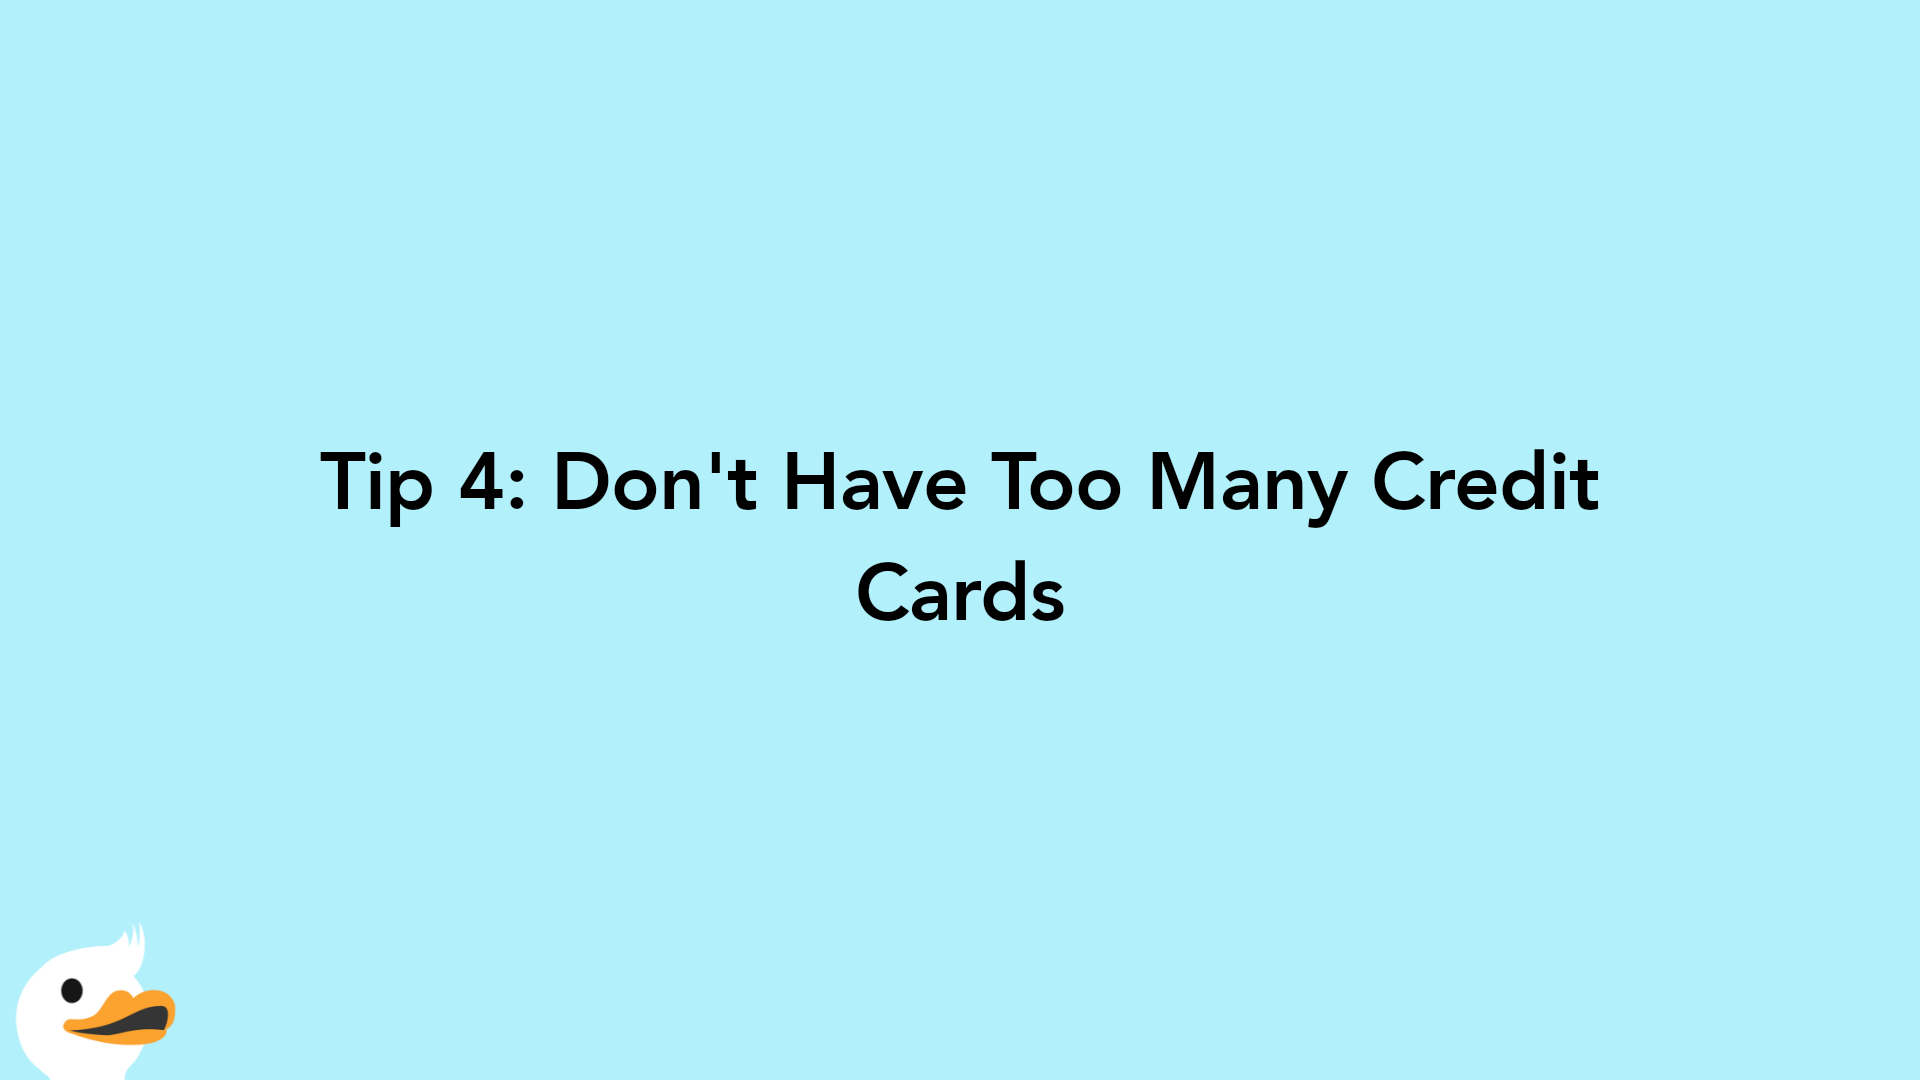 Tip 4: Don't Have Too Many Credit Cards